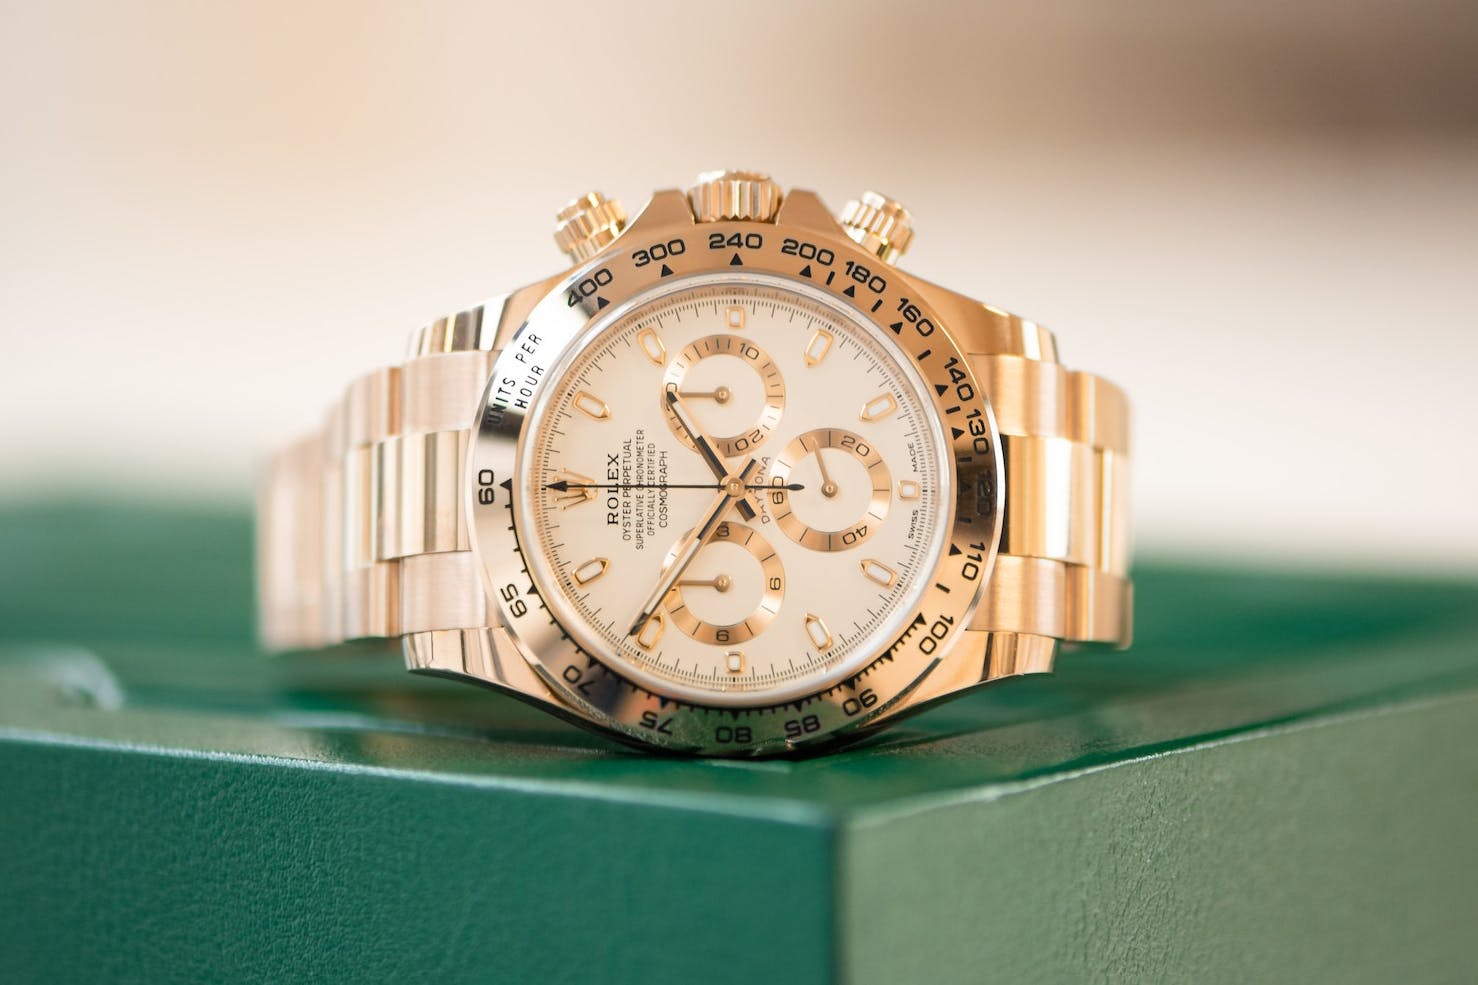 2022 ROLEX DAYTONA for sale by auction in London, United Kingdom